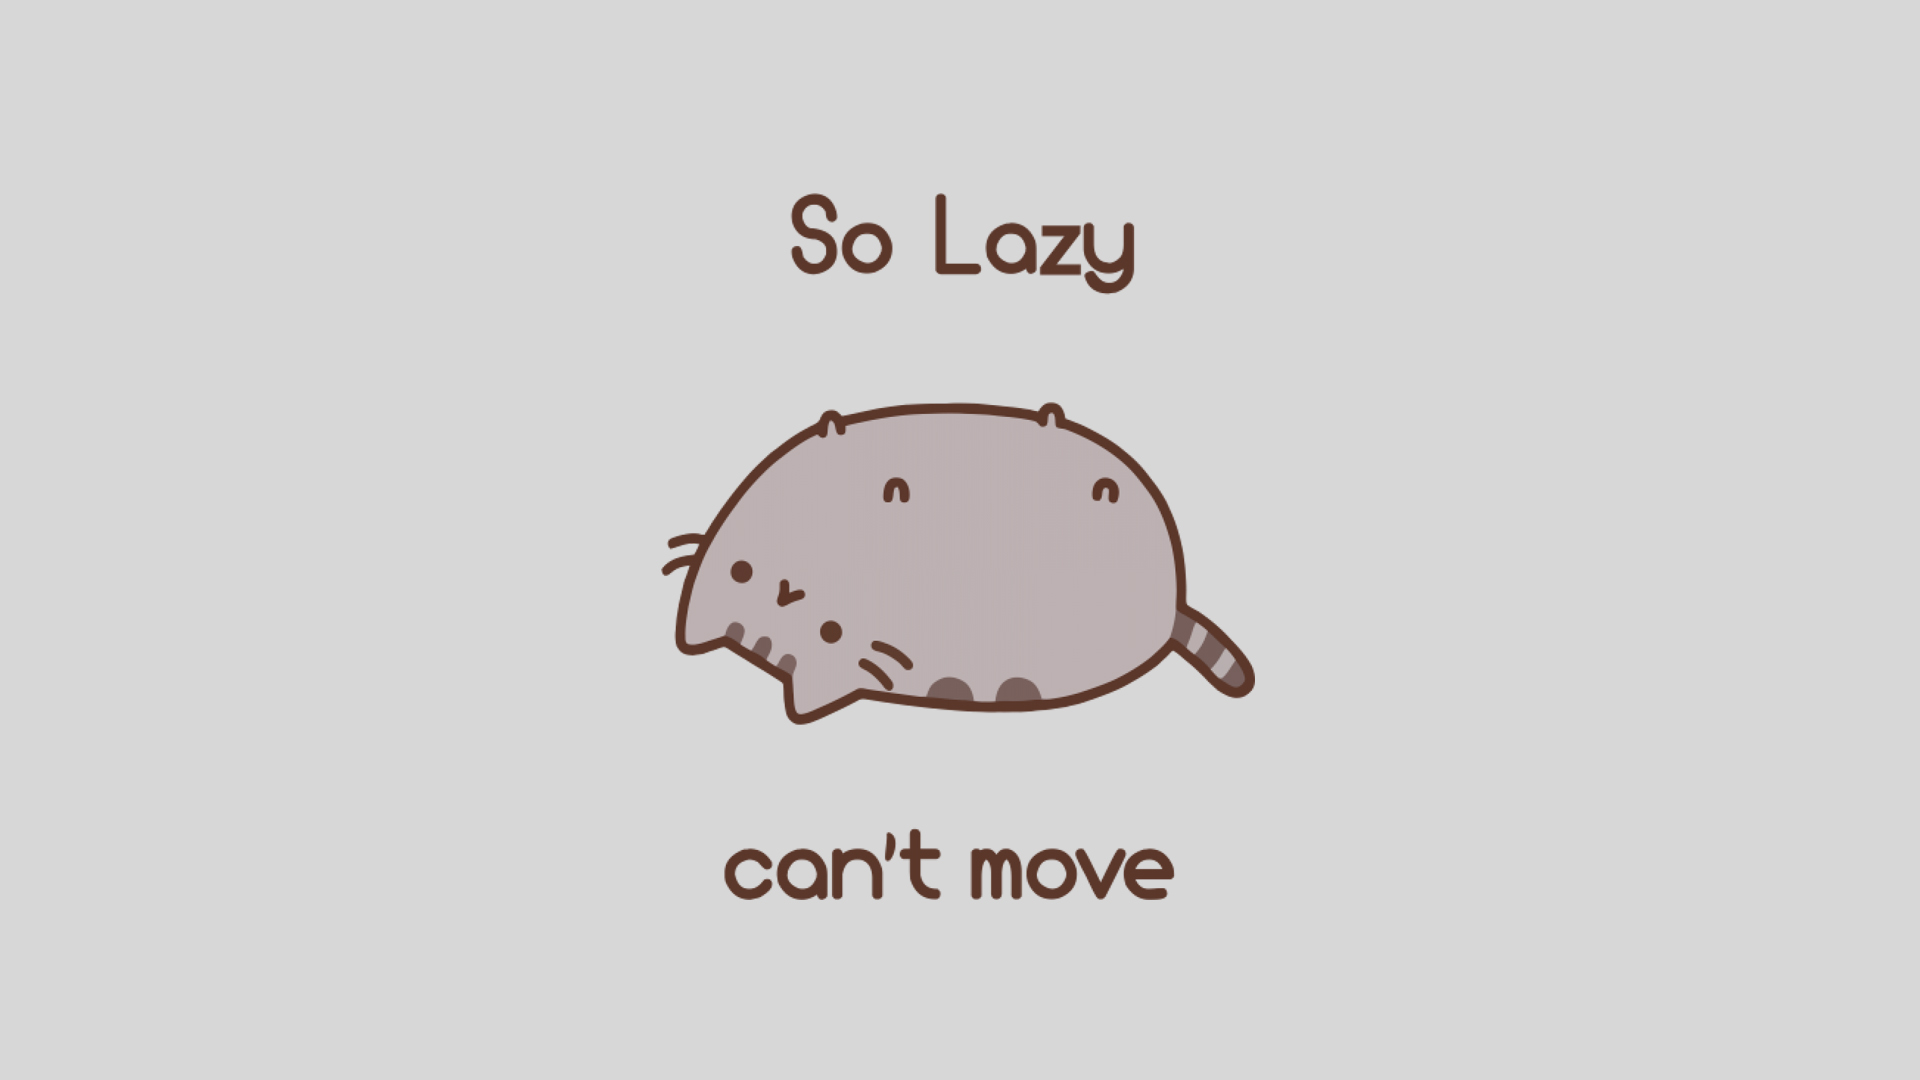 General 1920x1080 pusheen lazy cats memes humor minimalism typography simple background animals cartoon gray gray background